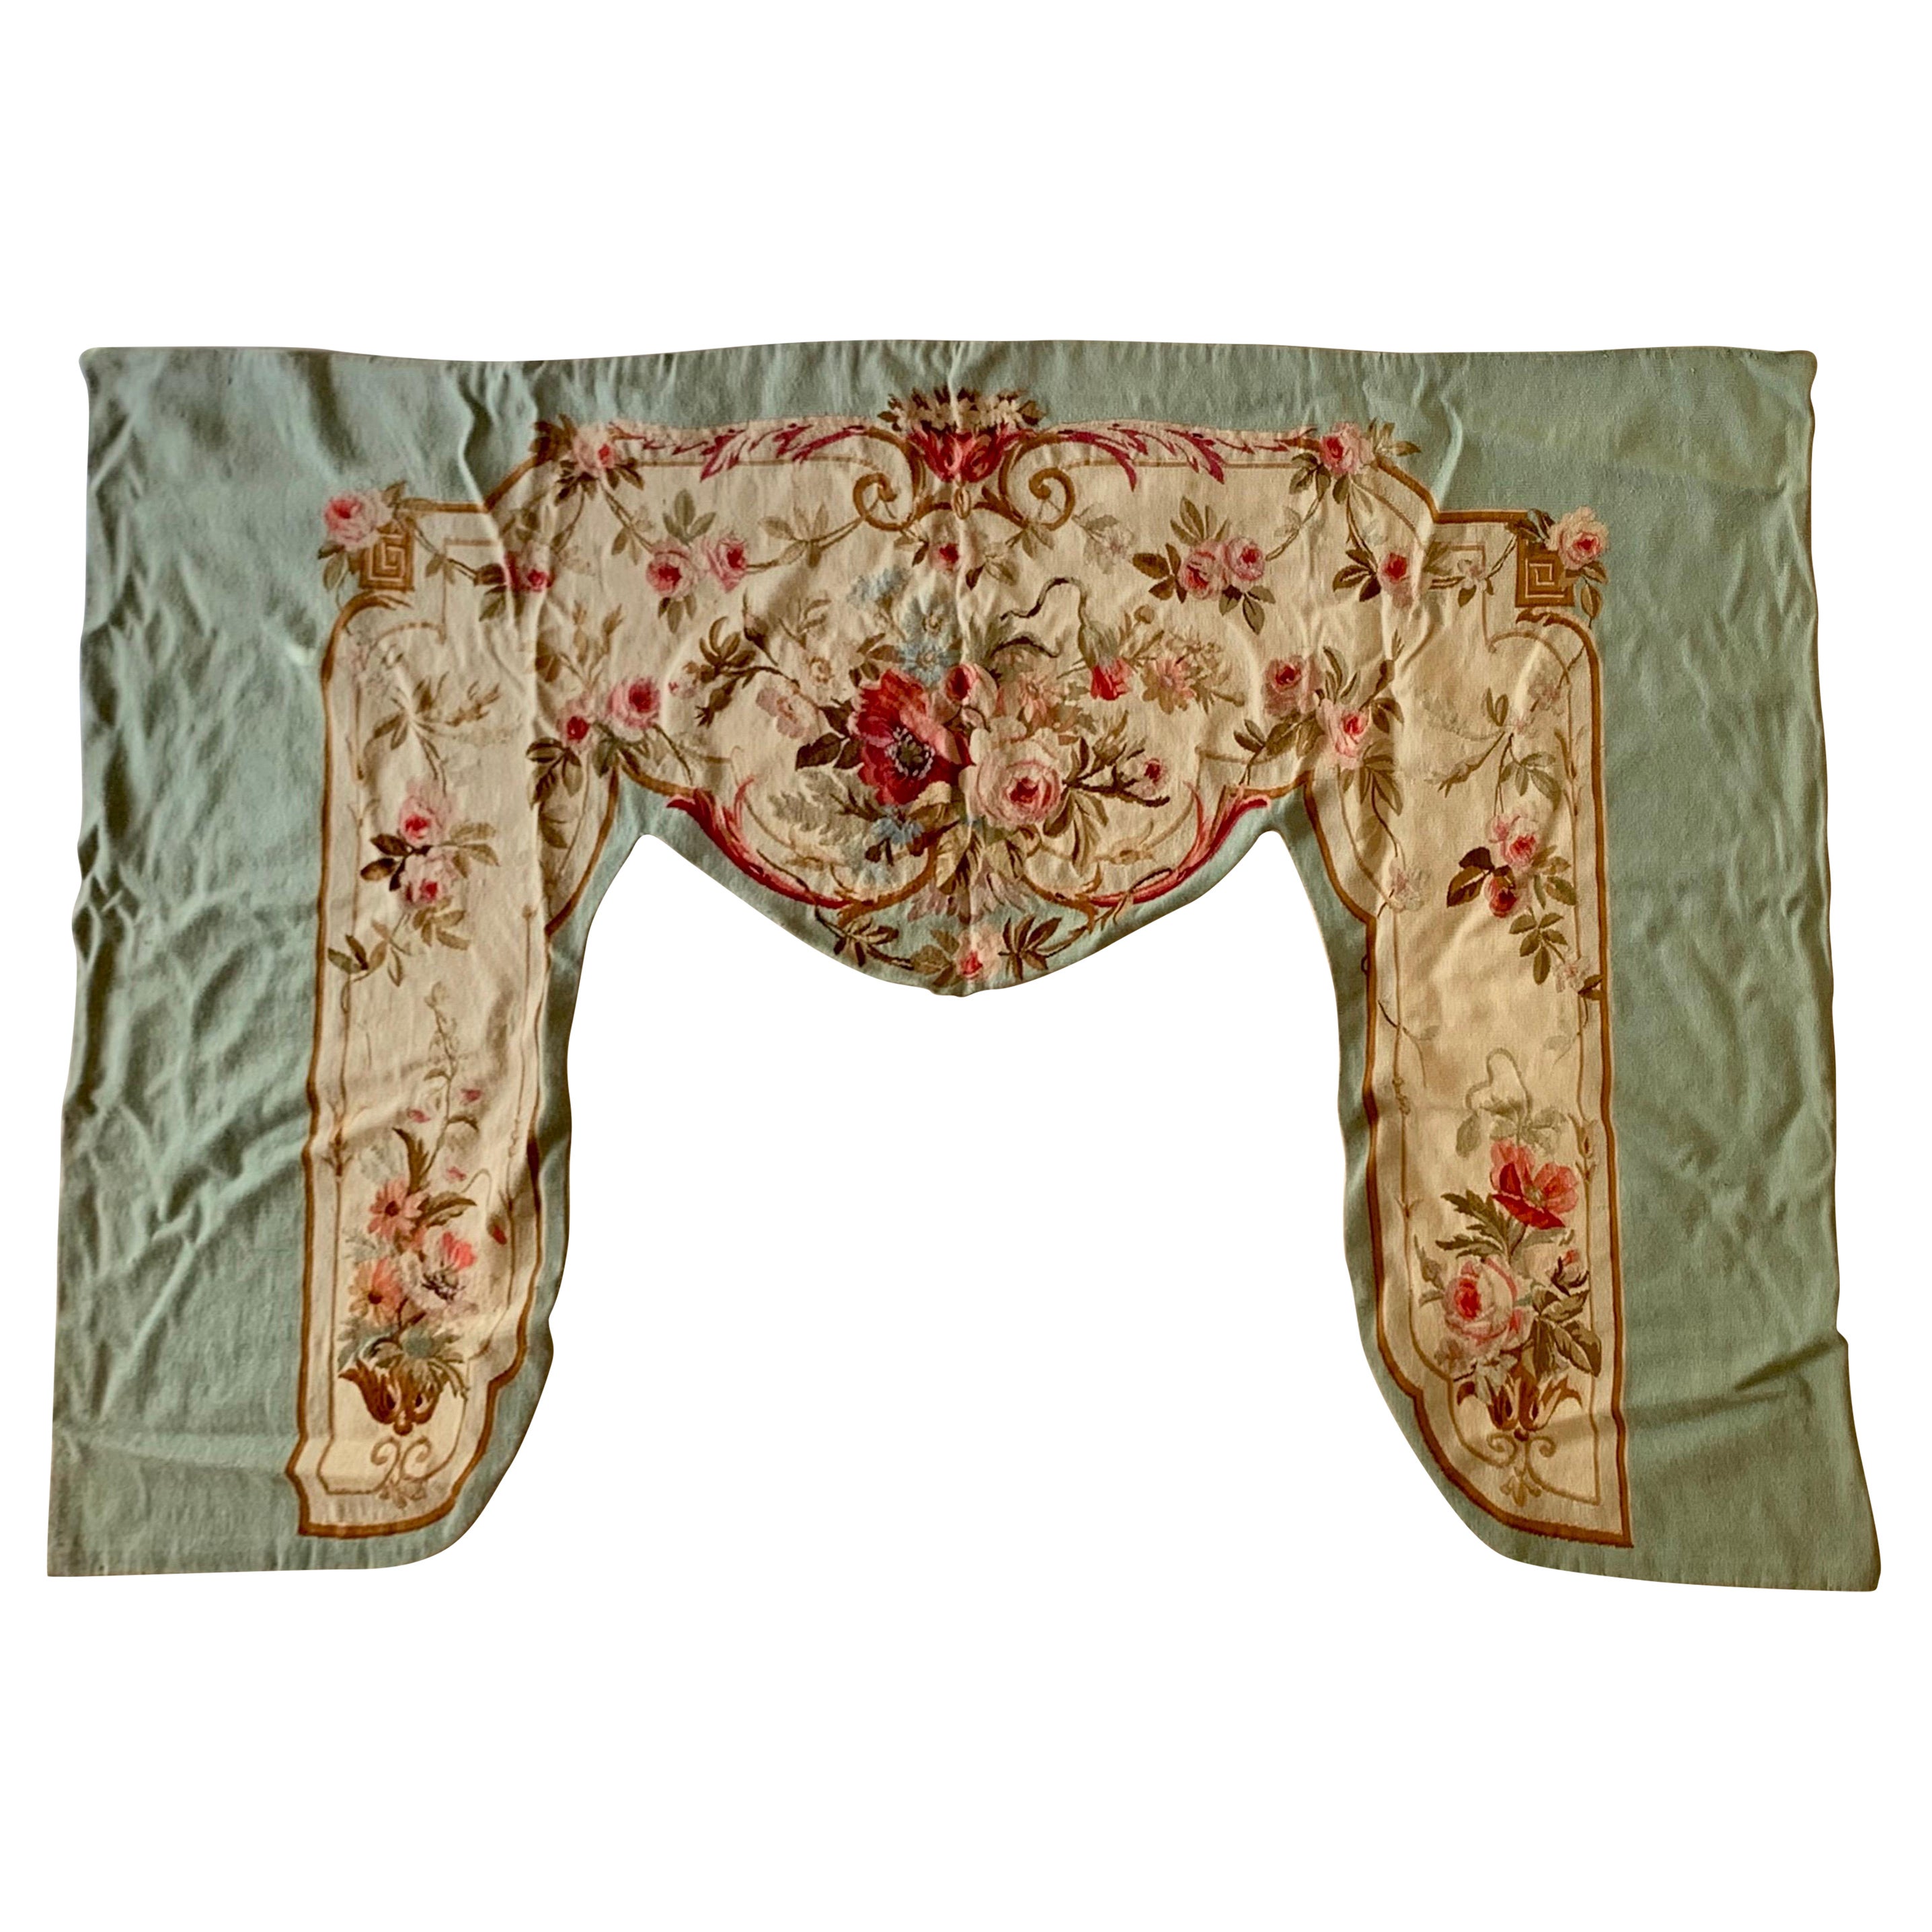 Light Blue 19th Century Floral French Aubusson Portière Decorative Tapestry For Sale